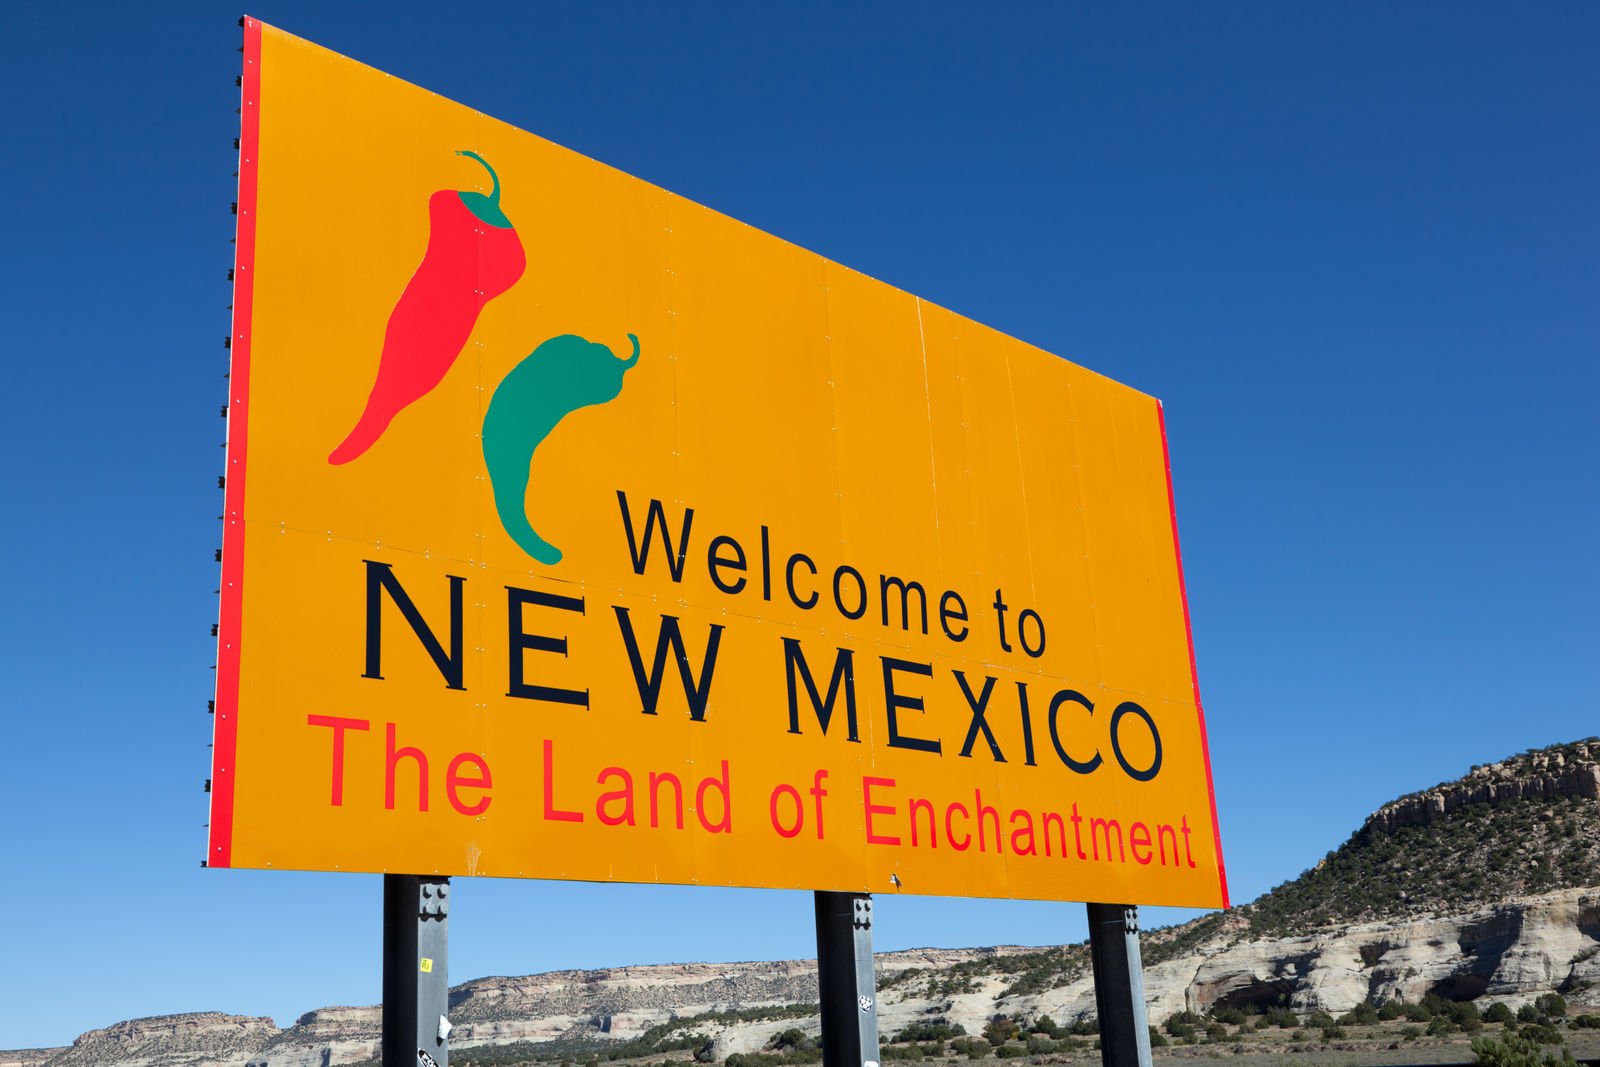 New Mexico Windshield Insurance: What are the Full Glass coverage laws in New Mexico?